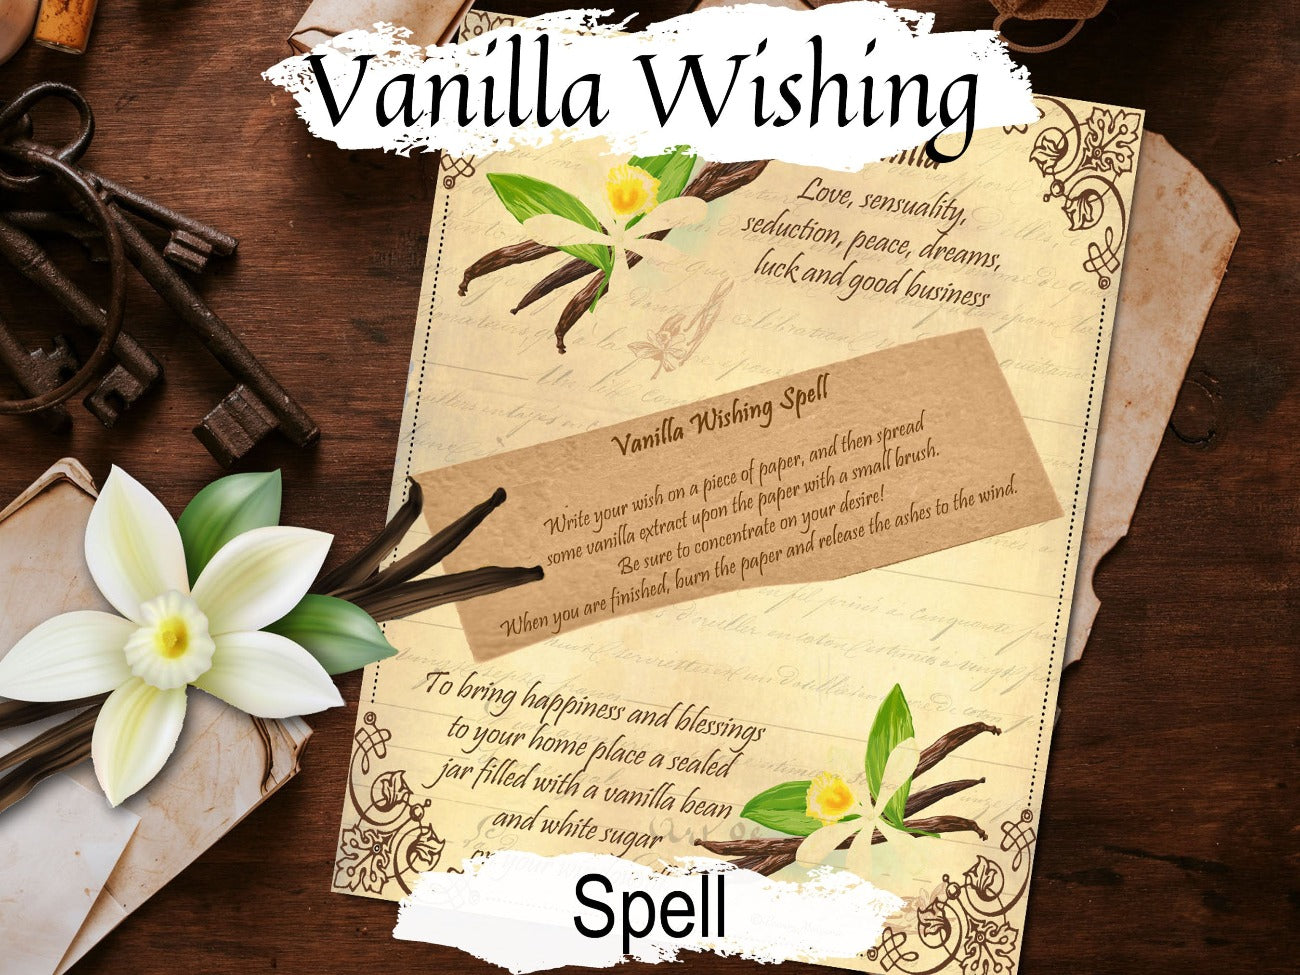 VANILLA WISHING SPELL, Kitchen Witch Magic, Cottage Witchcraft, Make a Wish, Dream Come True, Wicca Herb Apothecary, Green Witch Garden - Morgana Magick Spell